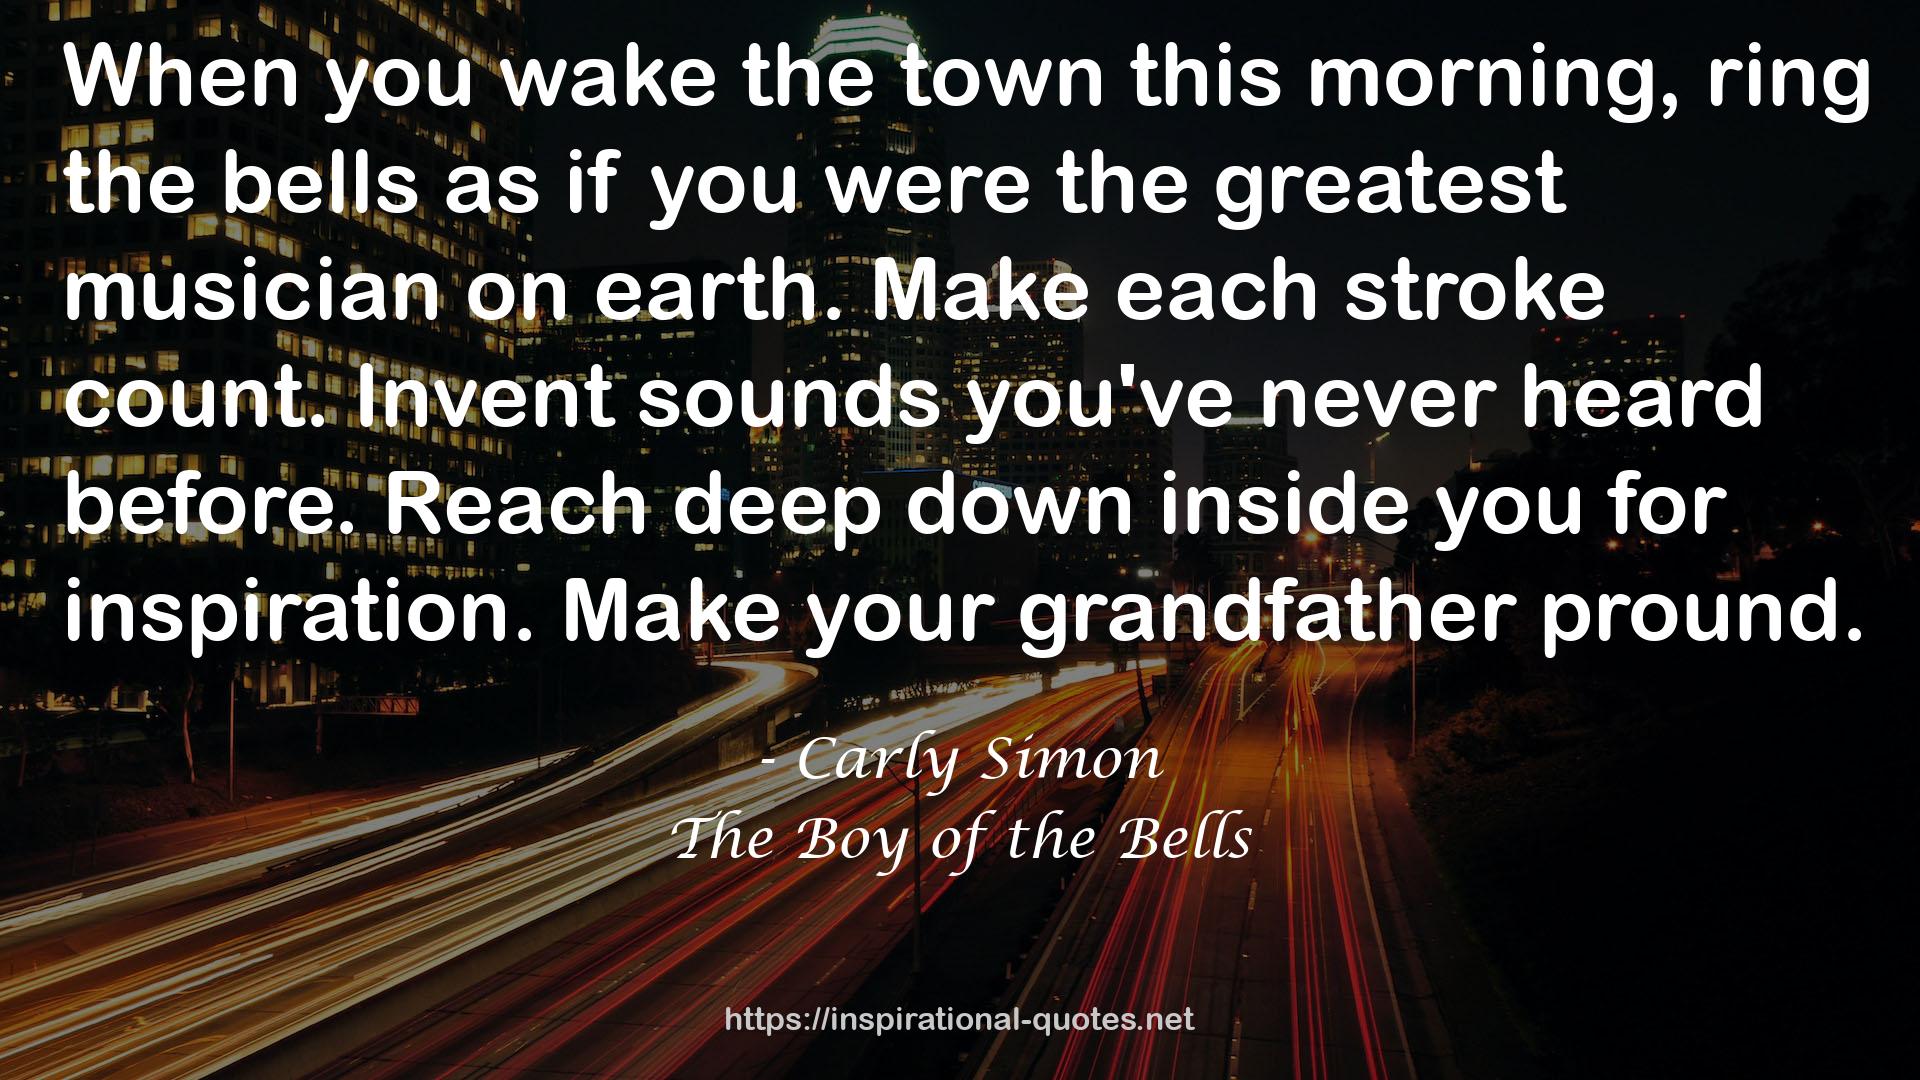 The Boy of the Bells QUOTES